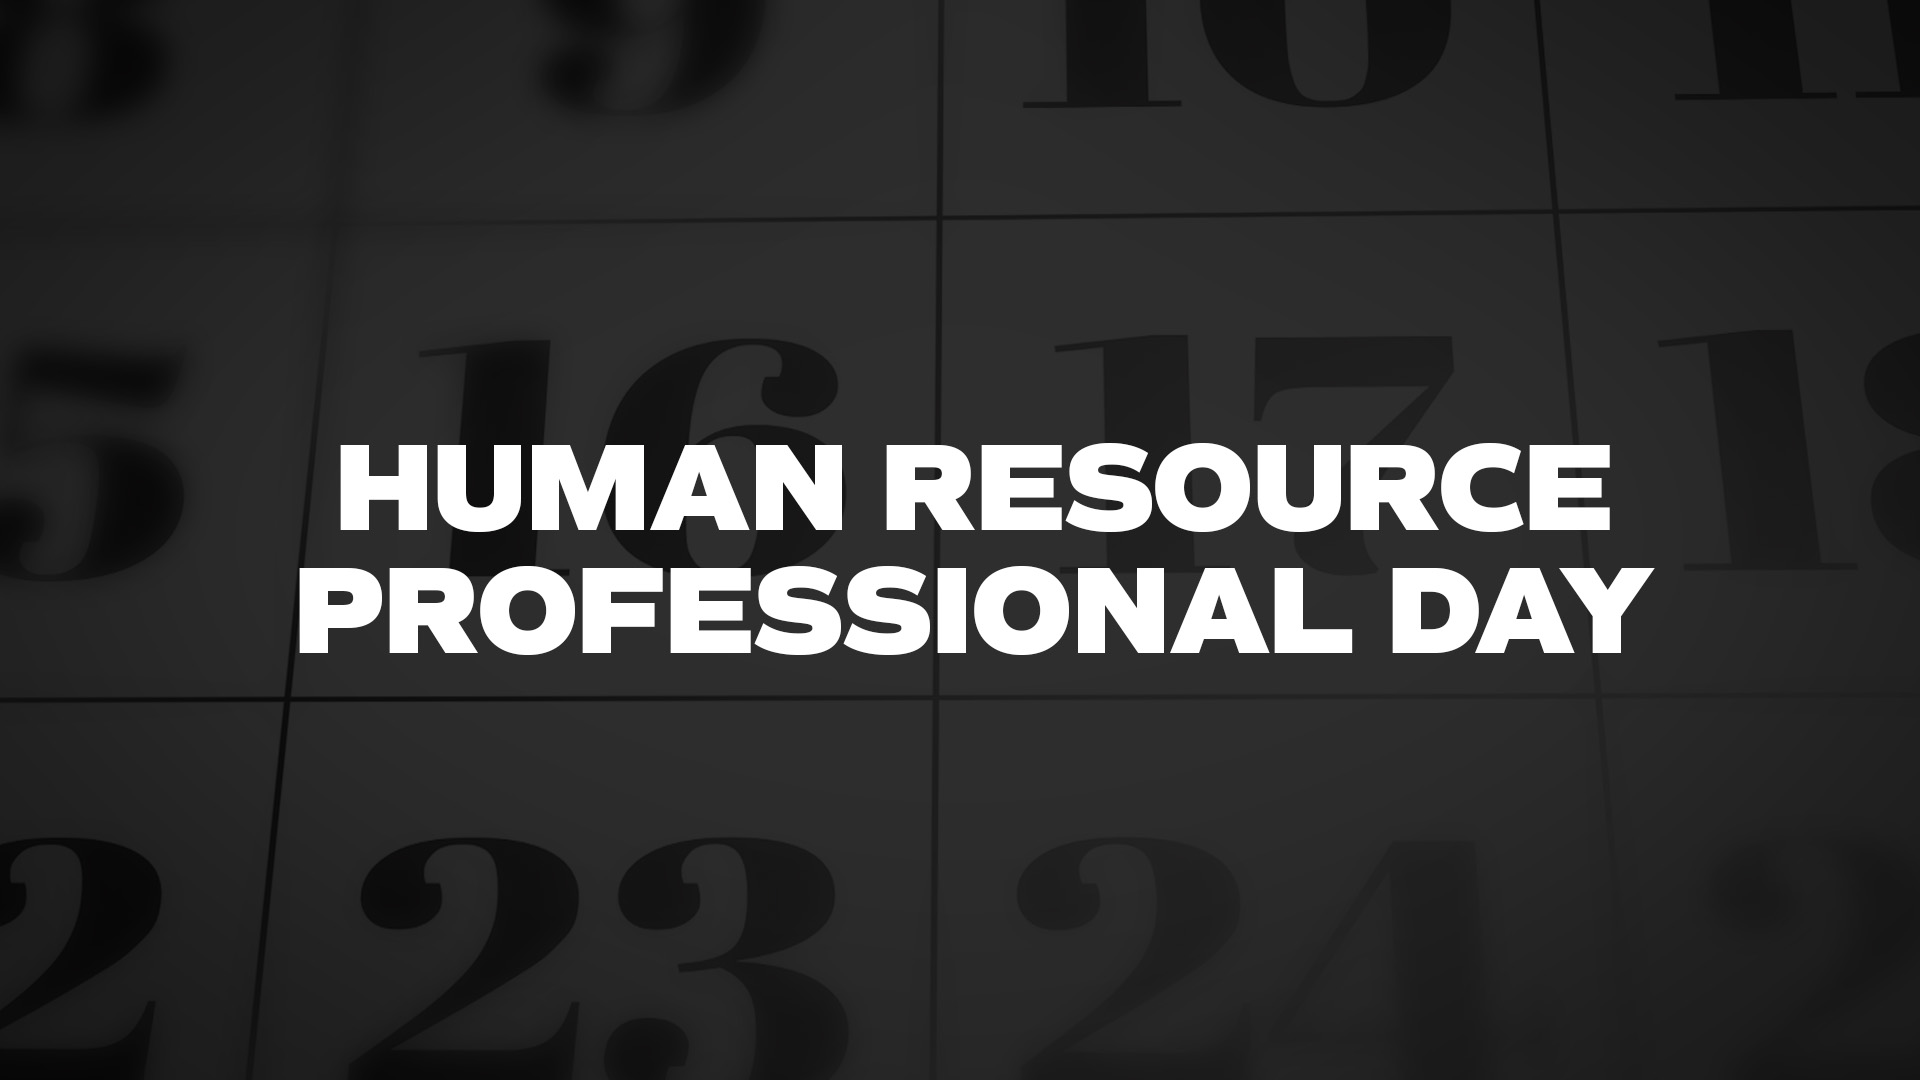 HUMAN RESOURCE PROFESSIONAL DAY - List of National Days